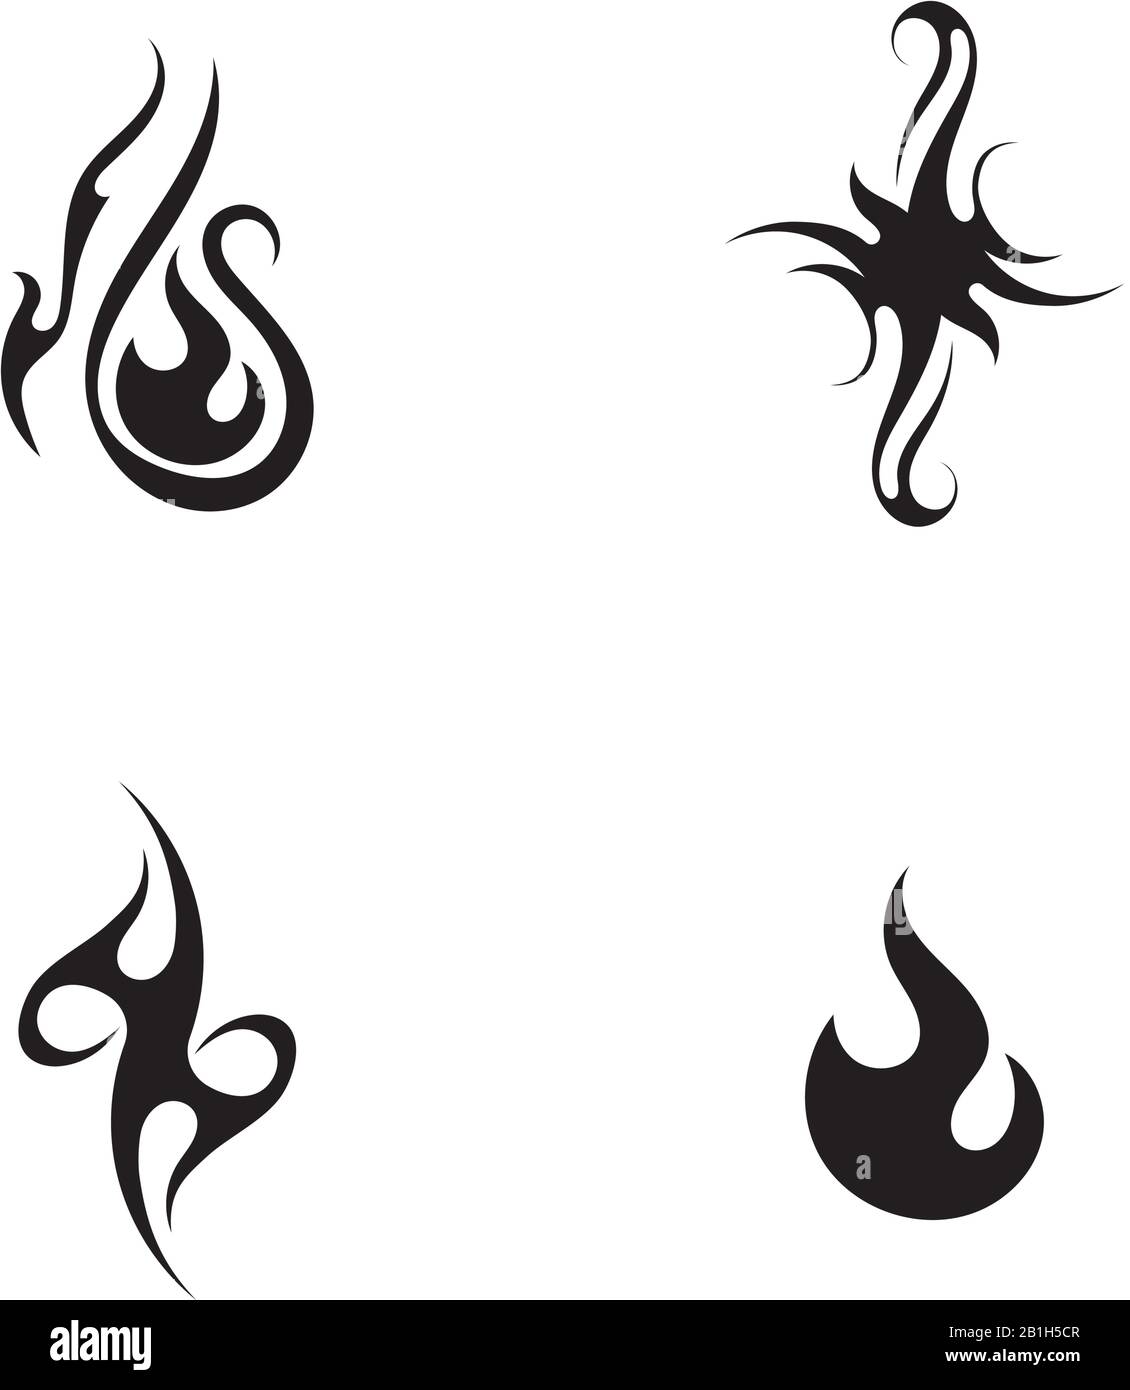 Flame / Fire tattoos - what do they mean? Tattoos Designs & Symbols - tattoo  meanings